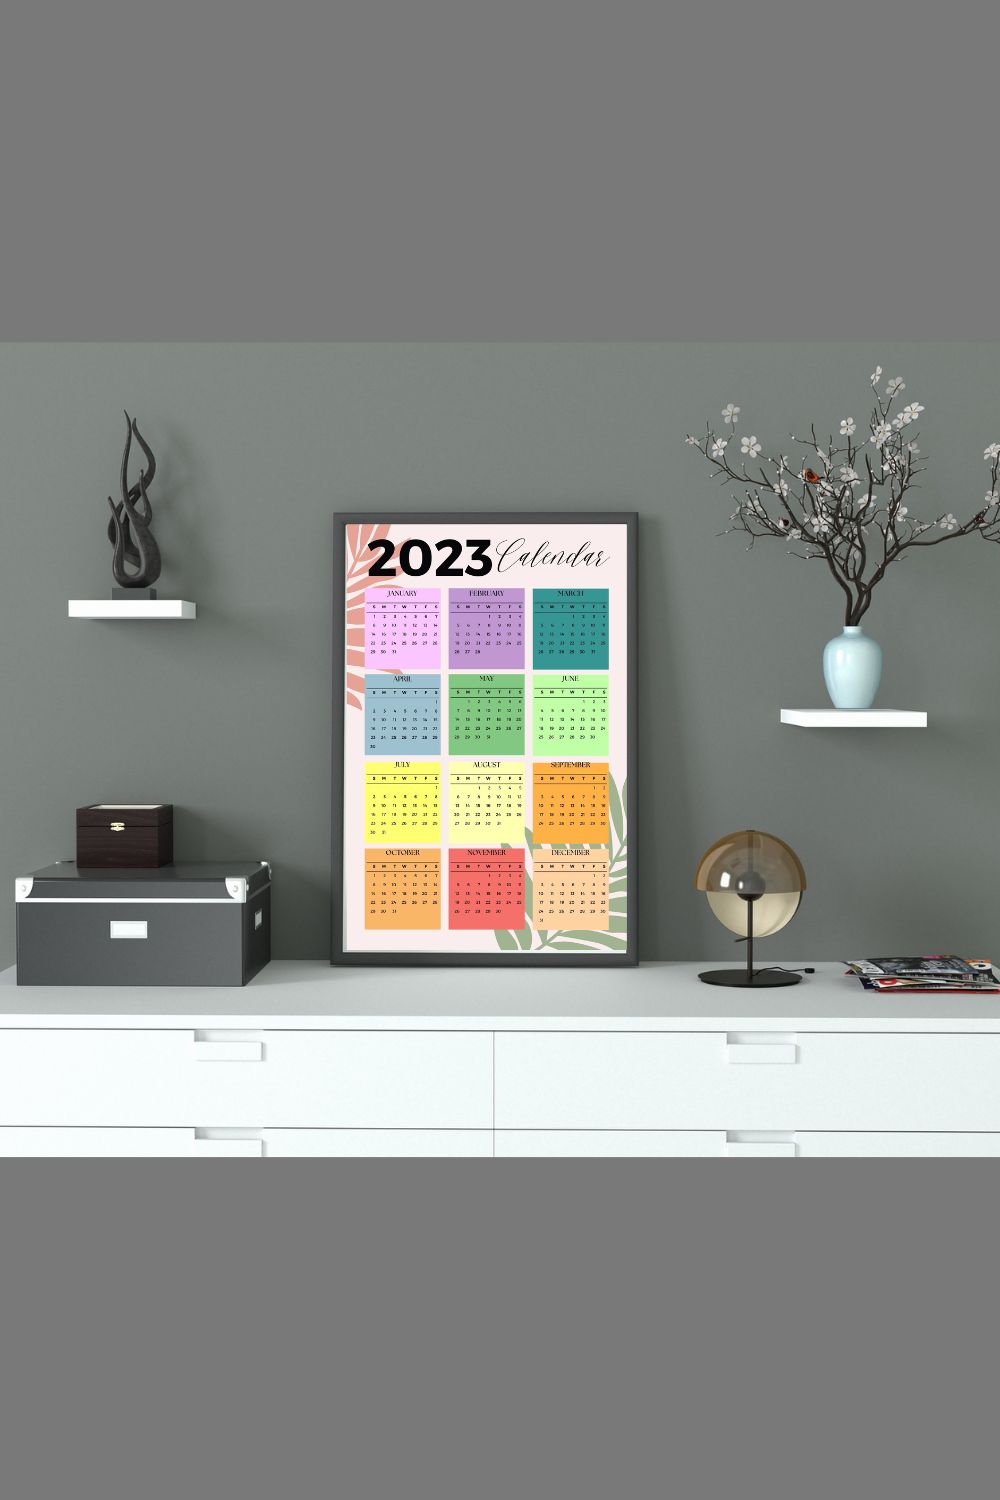 Colorful poster in a calendar style.